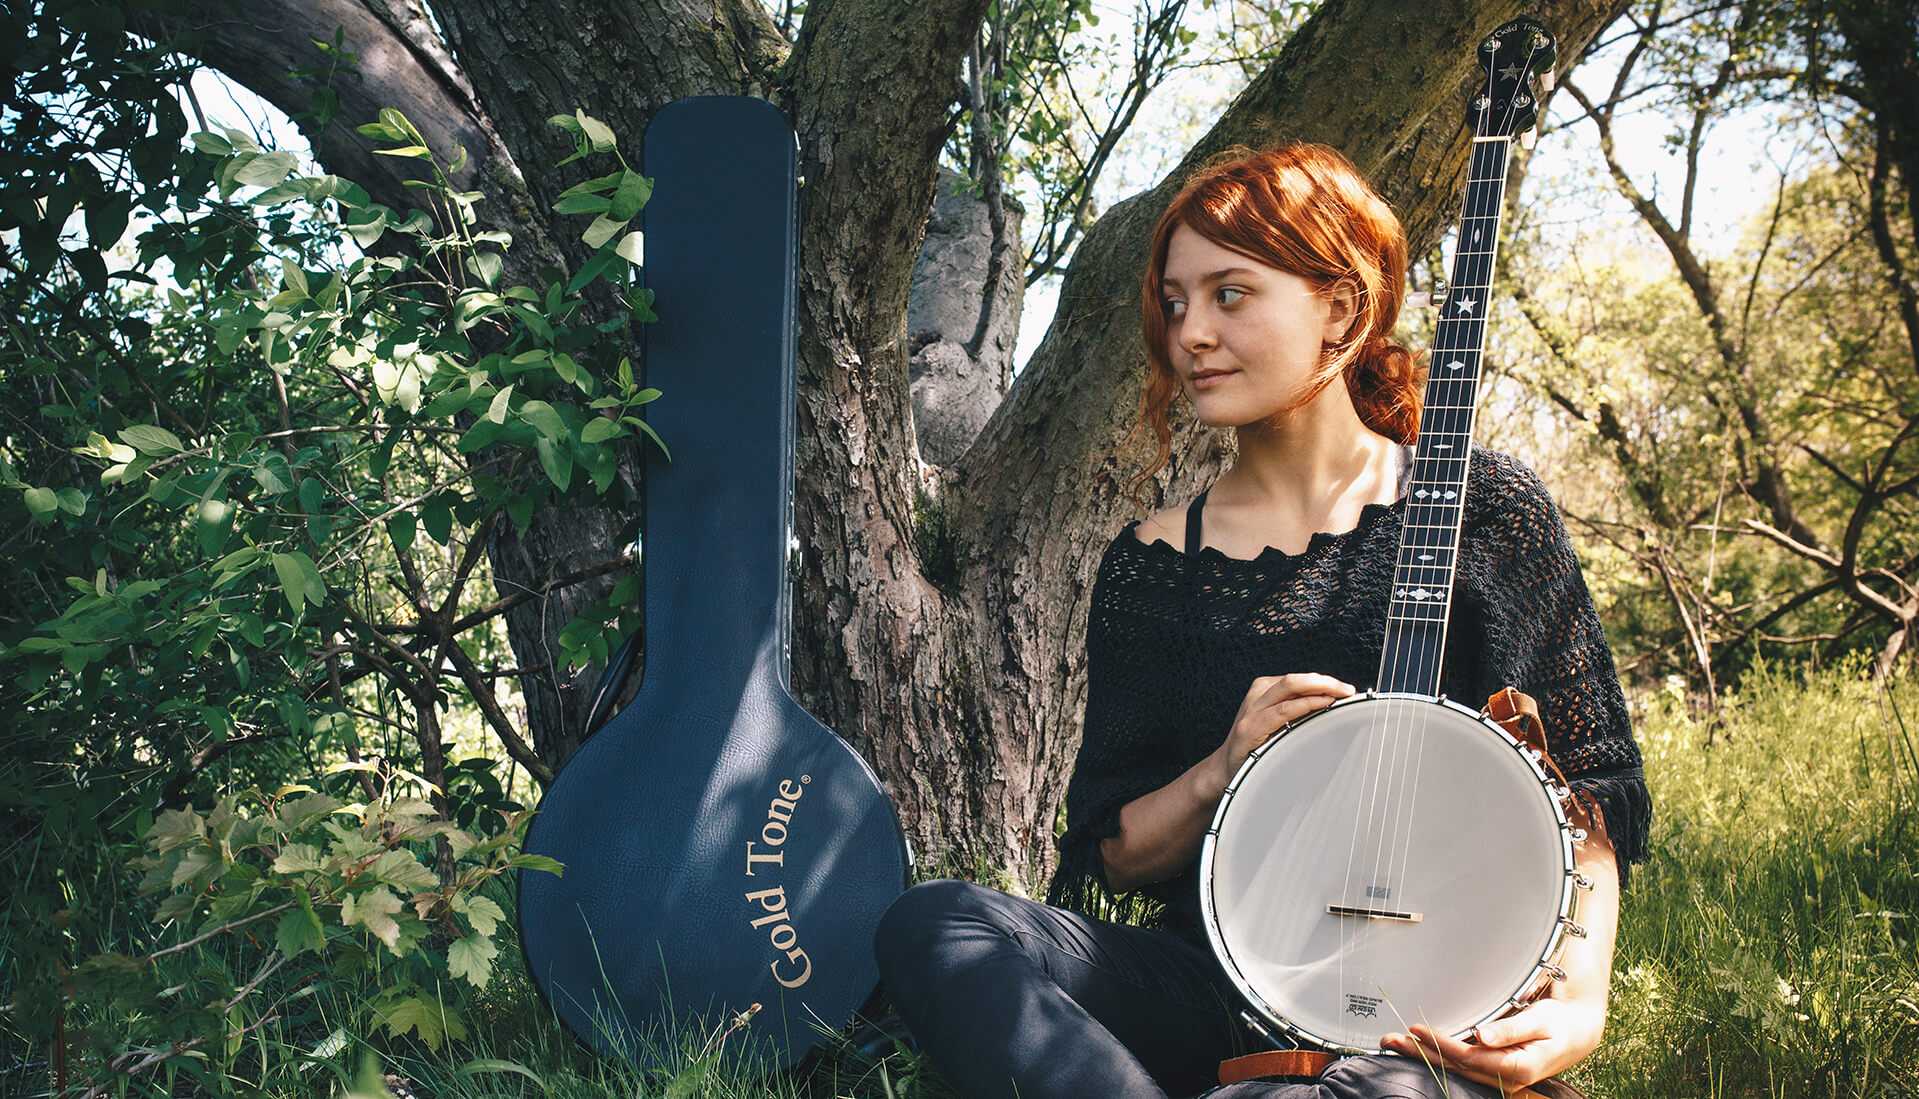 Libby DeCamp with her OT-800 banjo